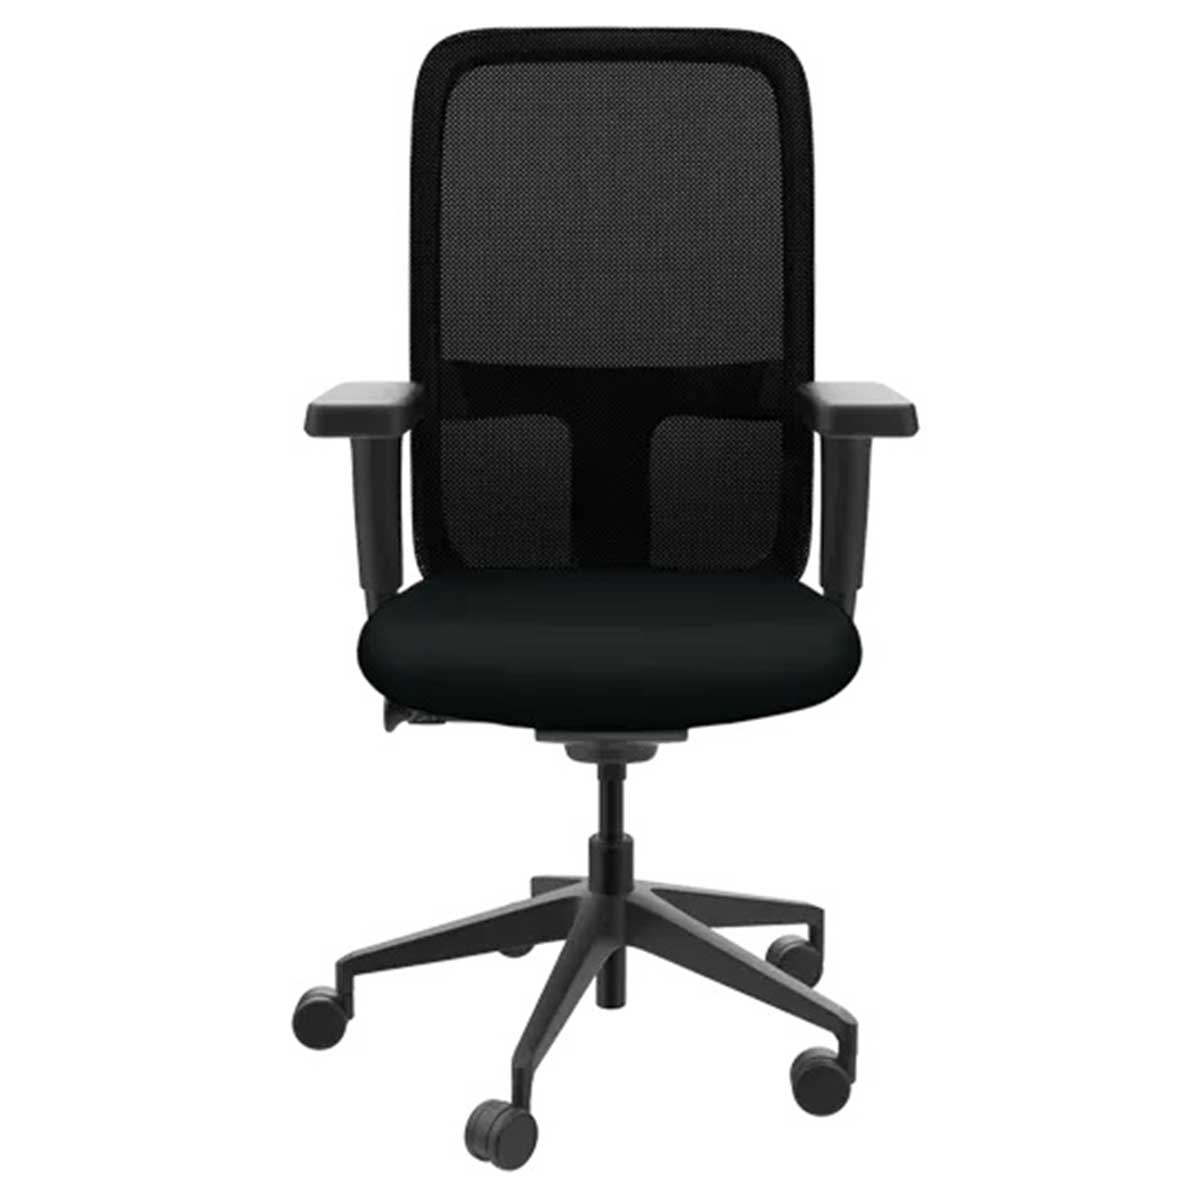 Revolving Chair Manufacturers, Suppliers in Mohan Cooperative Industrial Estate